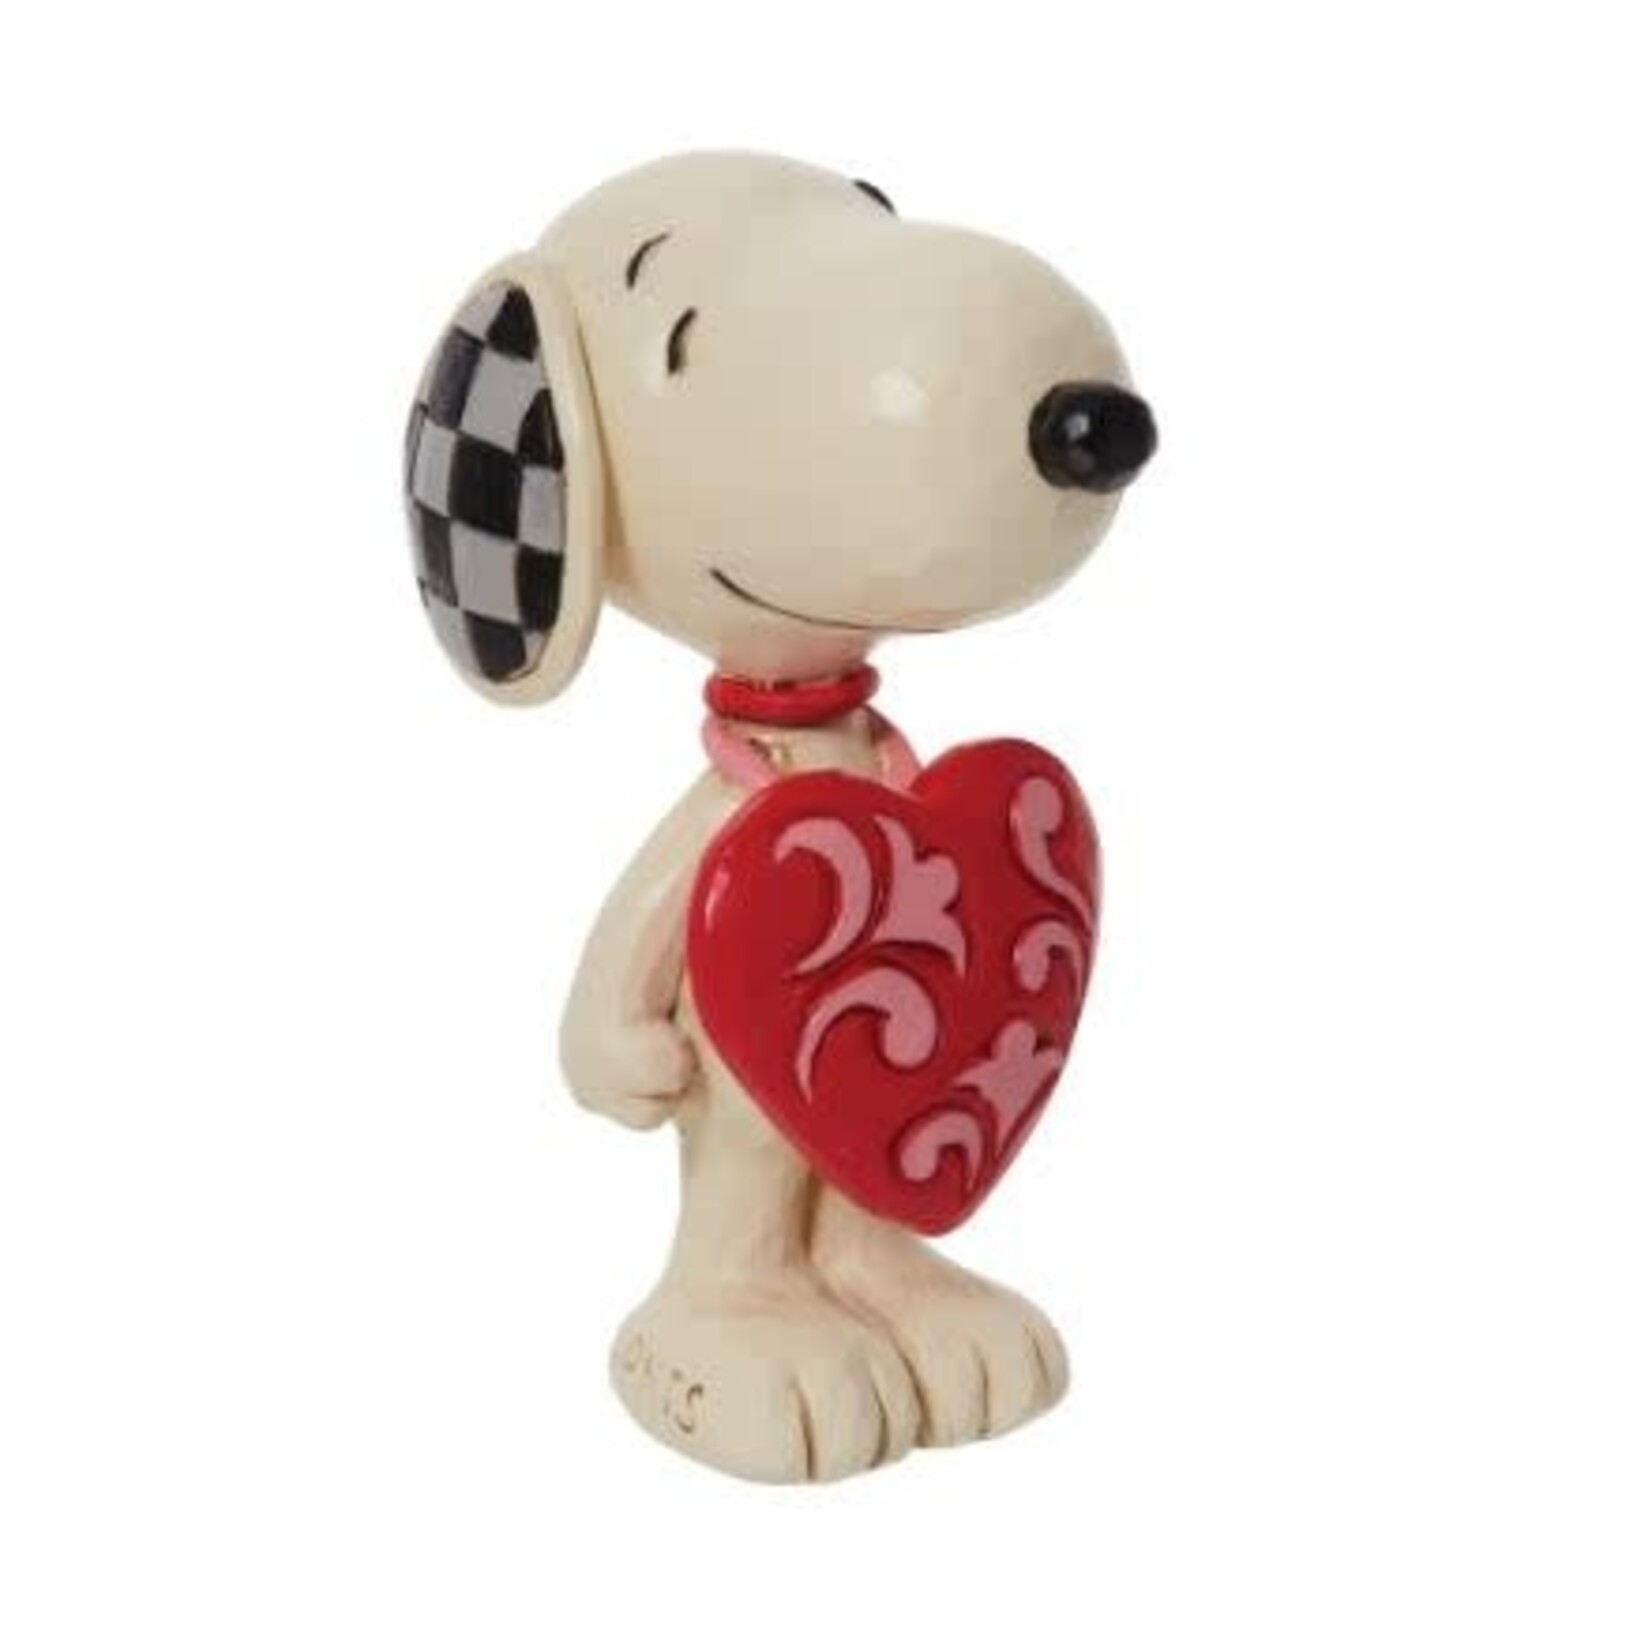 JS SNOOPY WEARING HEART SIGN FIG